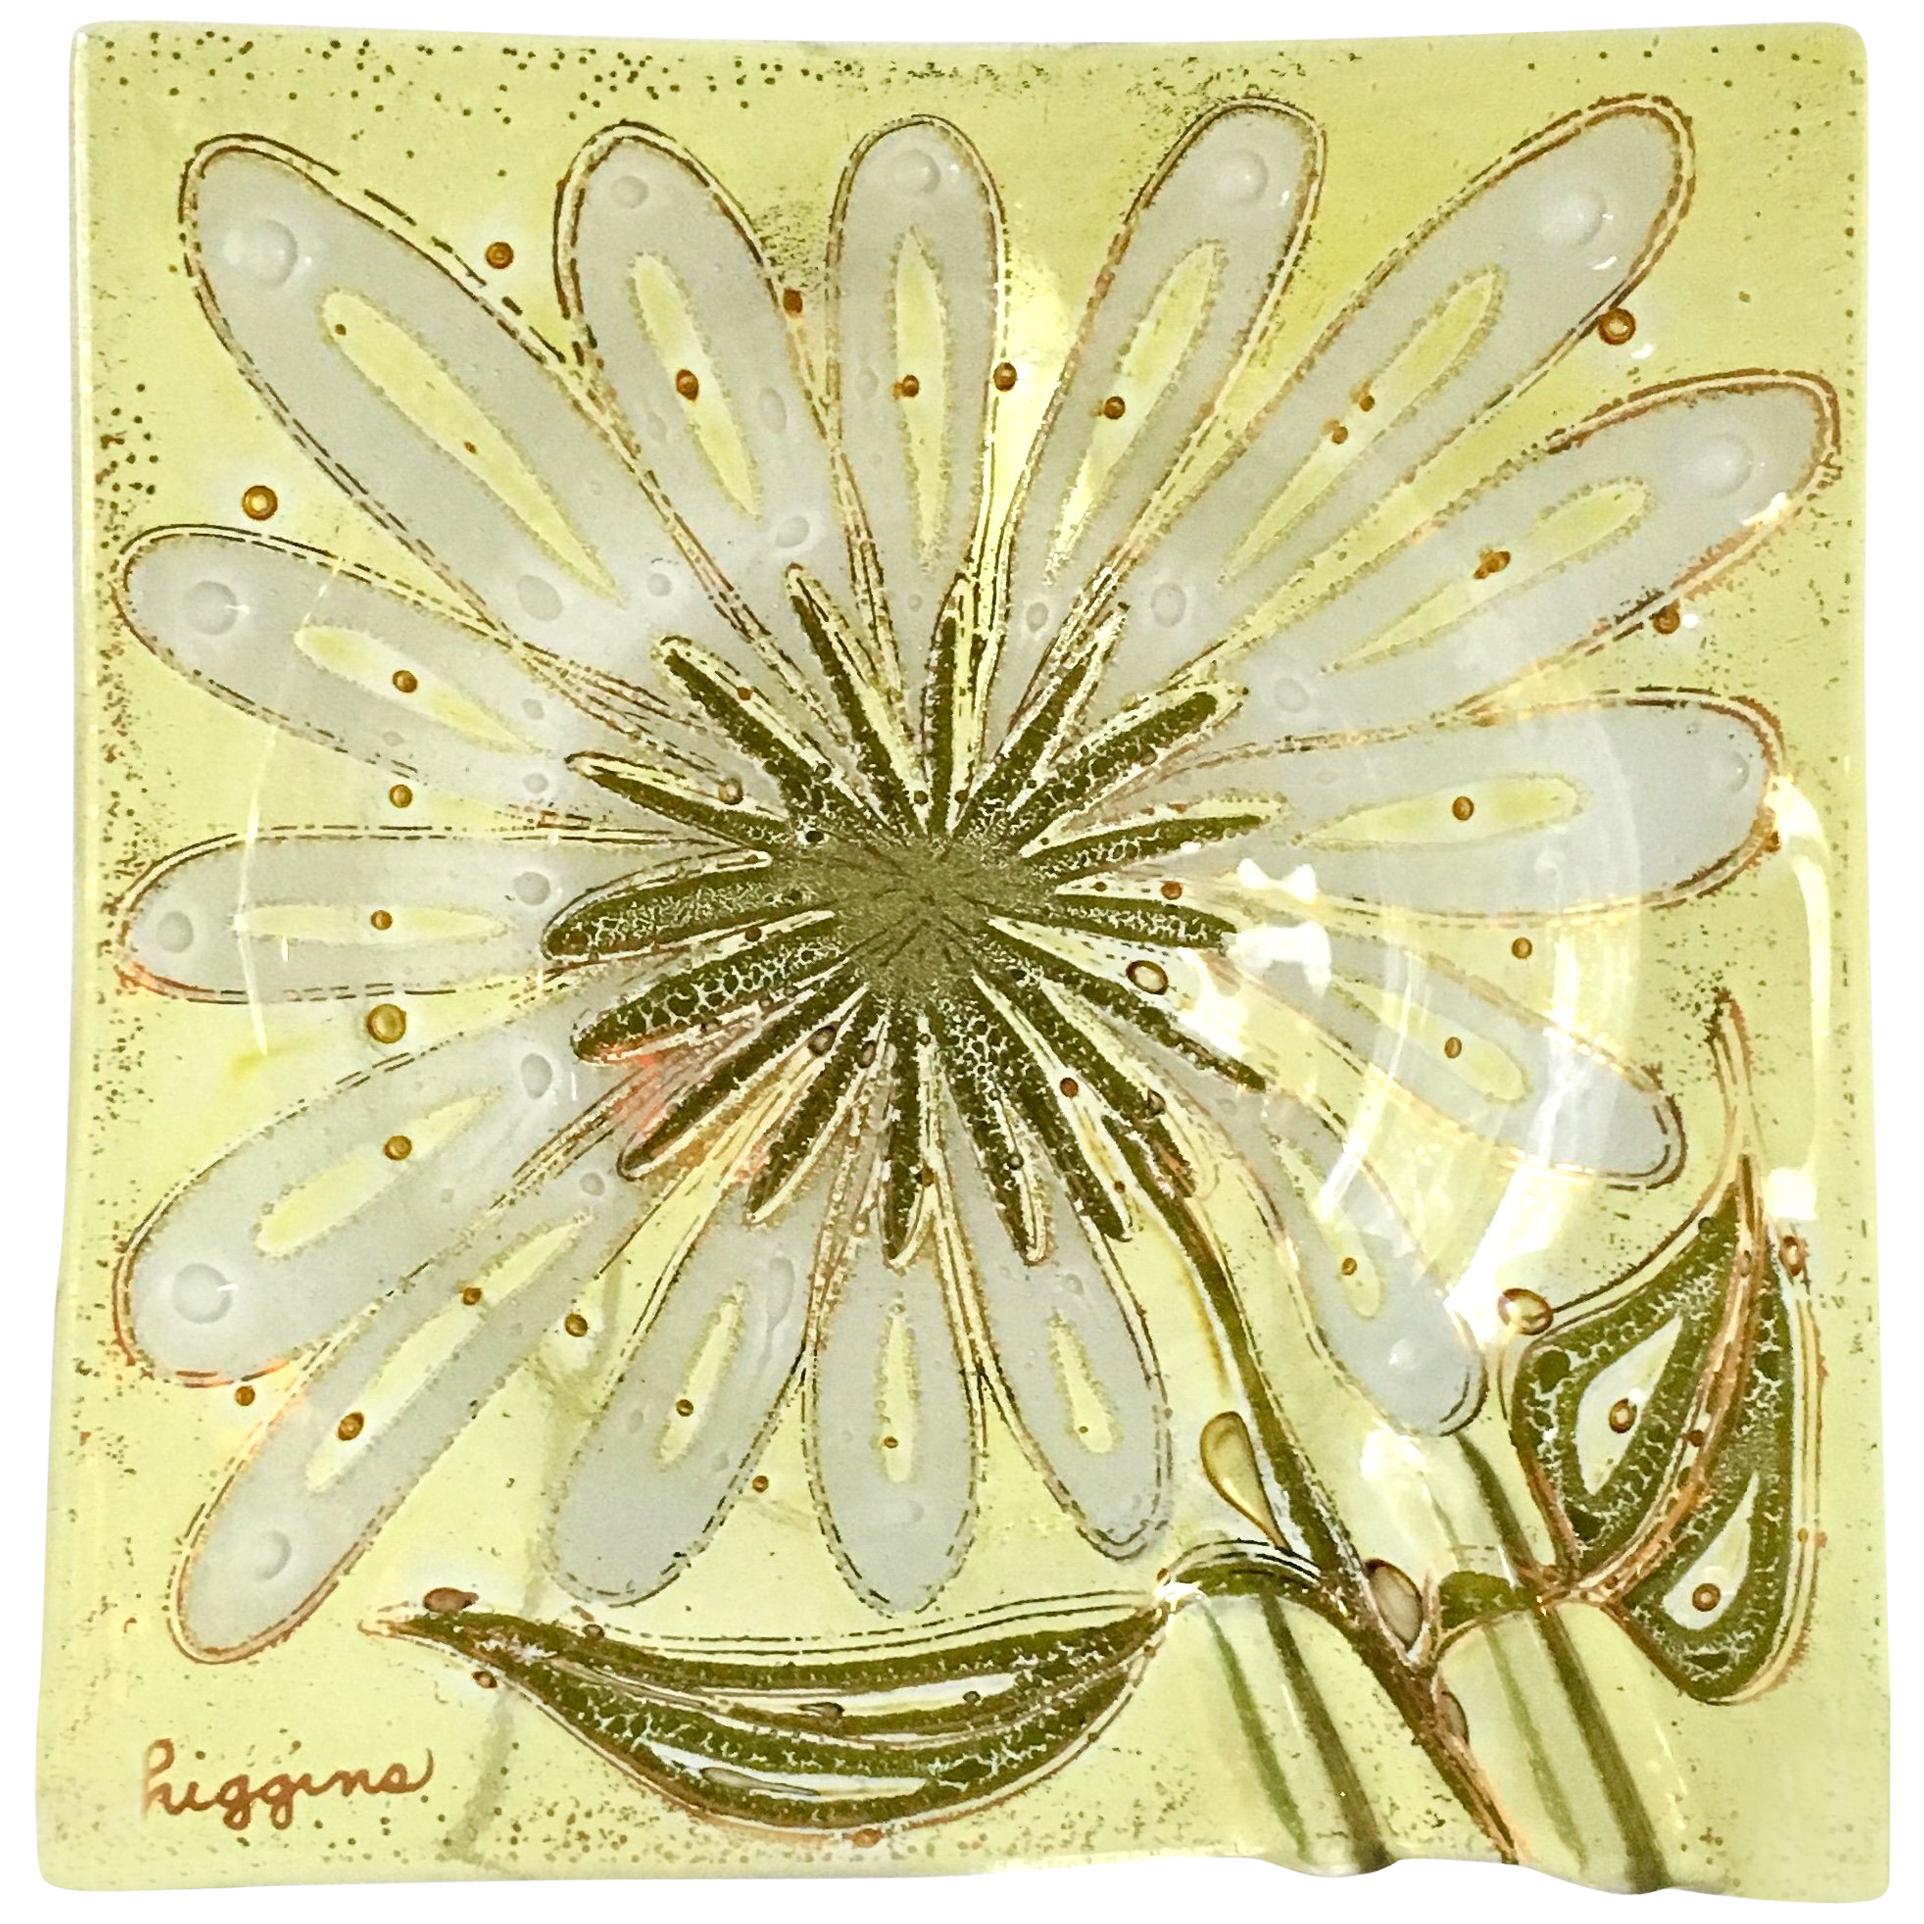 Daisy Fused Glass Square Ashtray by Higgins For Sale